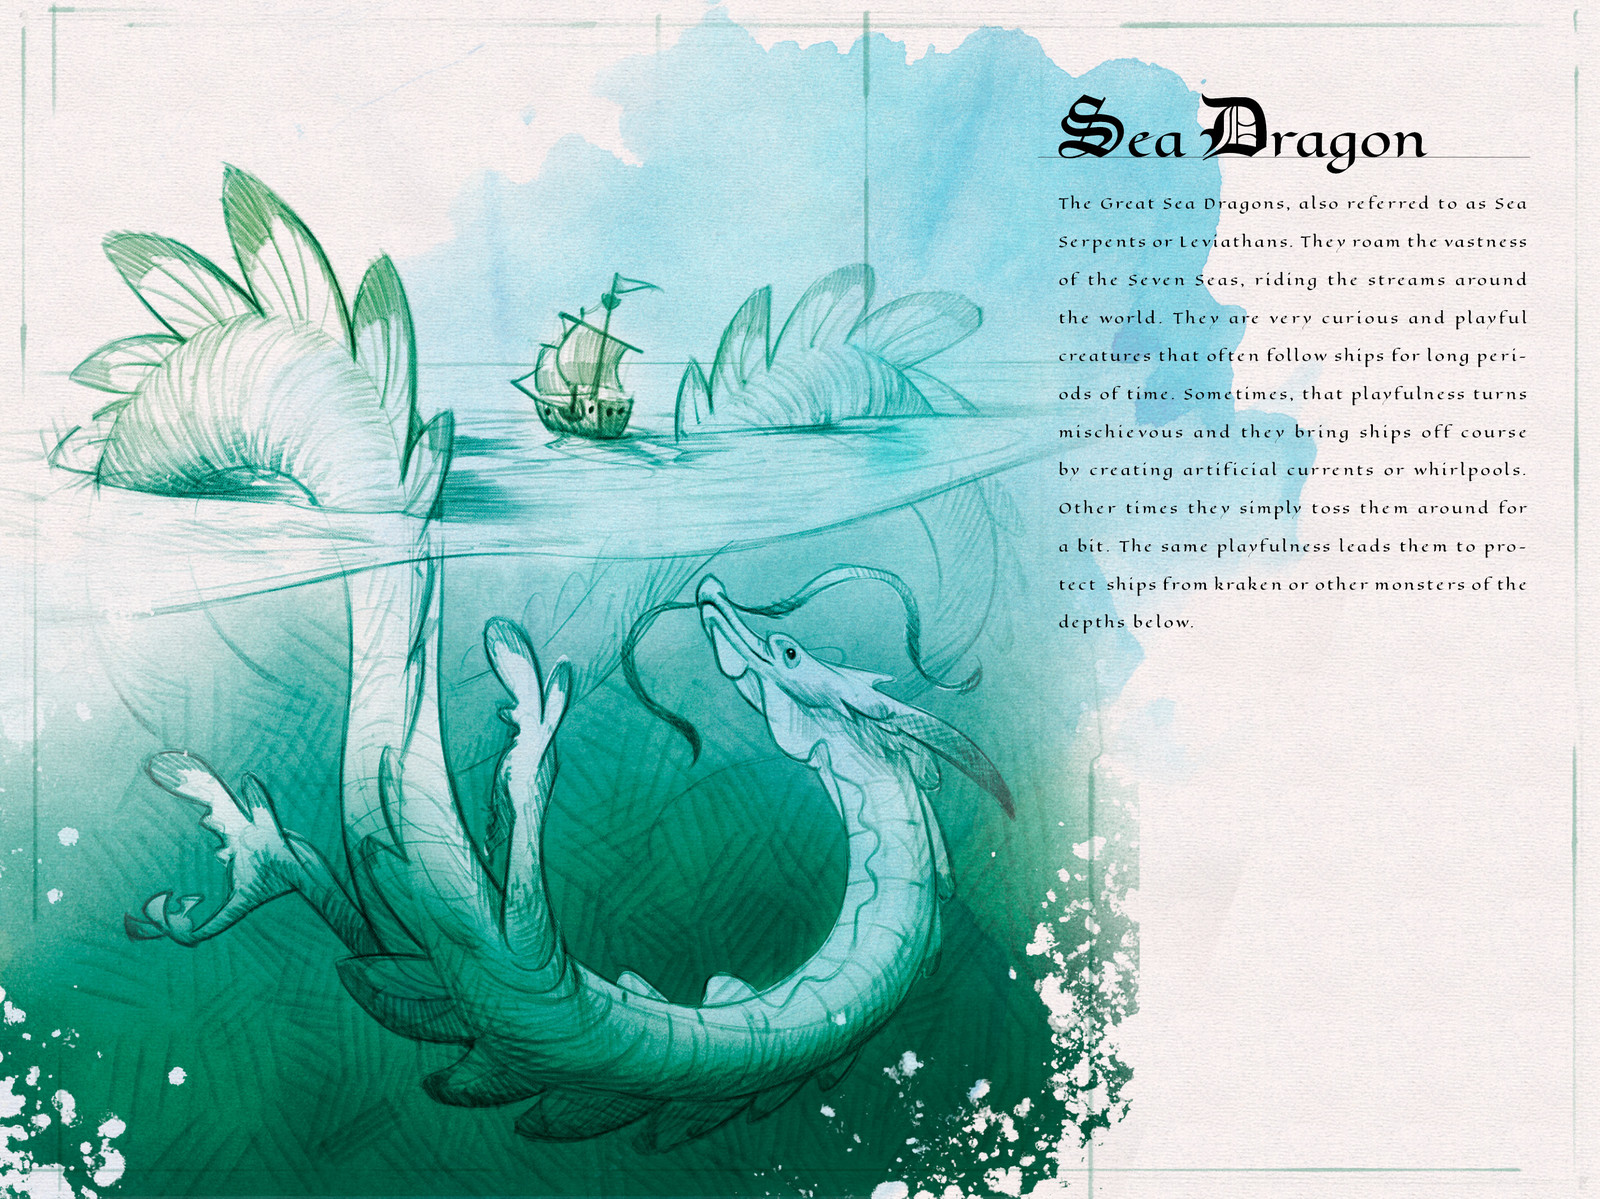 Page one of the  Dragon Compendium showing and describing the Sea Dragon